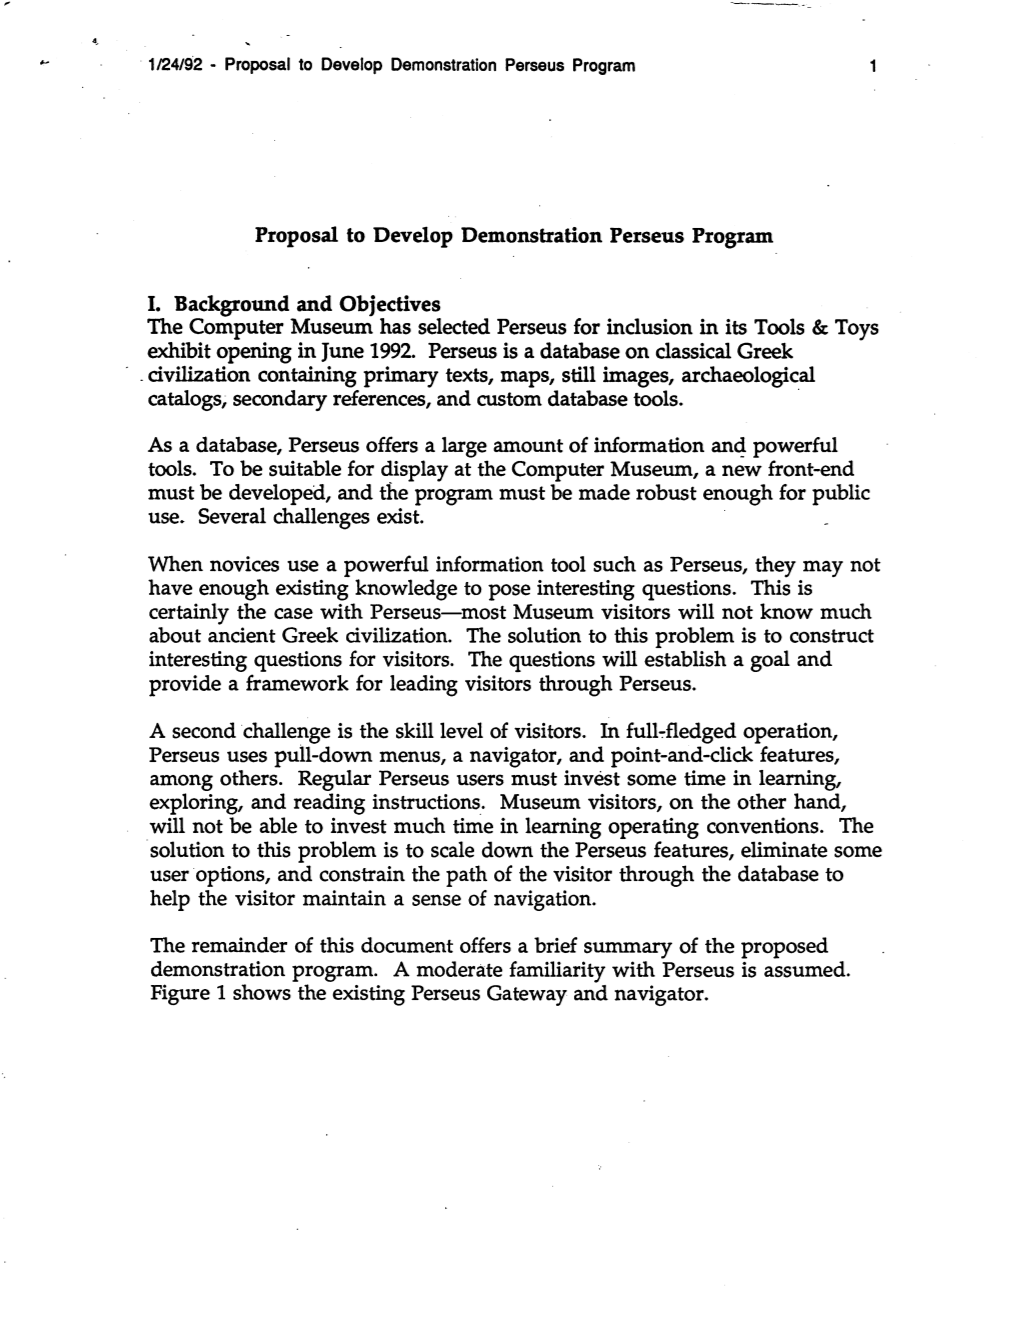 Perseus Project Staff to Re~Iew Accuracy and Emphasis of Subject Matter 1/24/92 - Proposal to Develop Demonstration Perseus Program 6